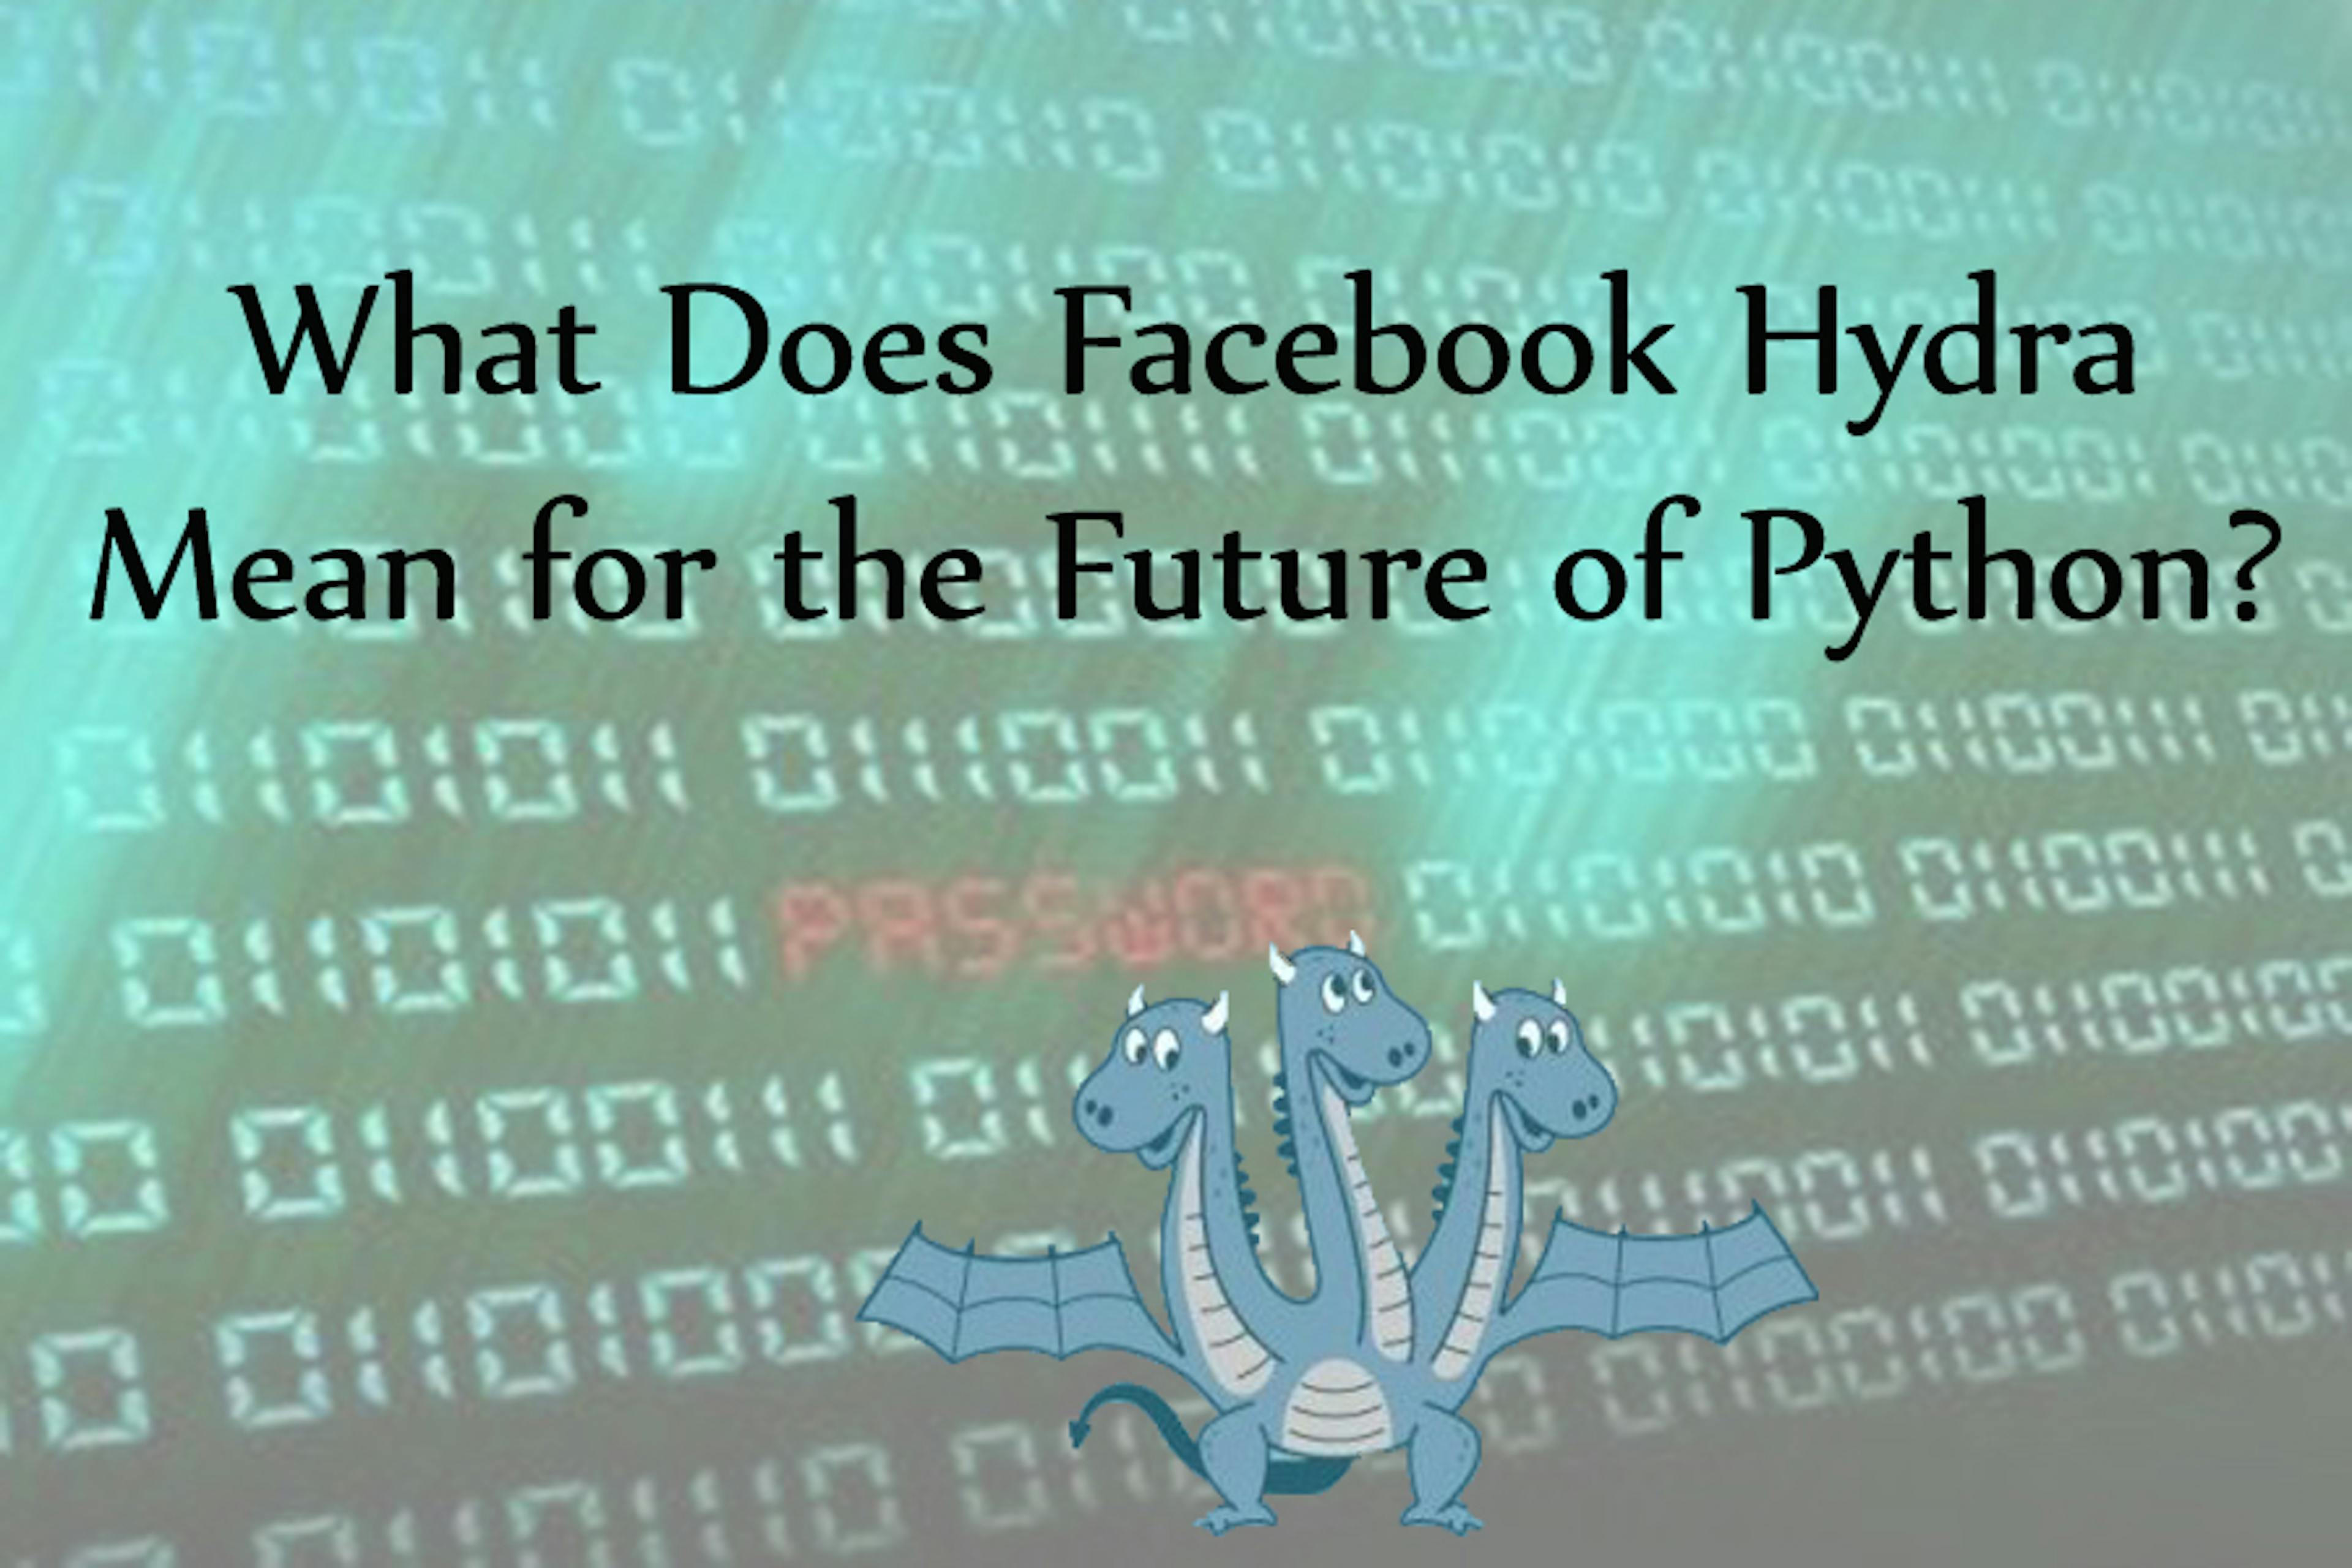 /what-does-facebook-hydra-mean-for-the-future-of-python-kk1c3zsa feature image